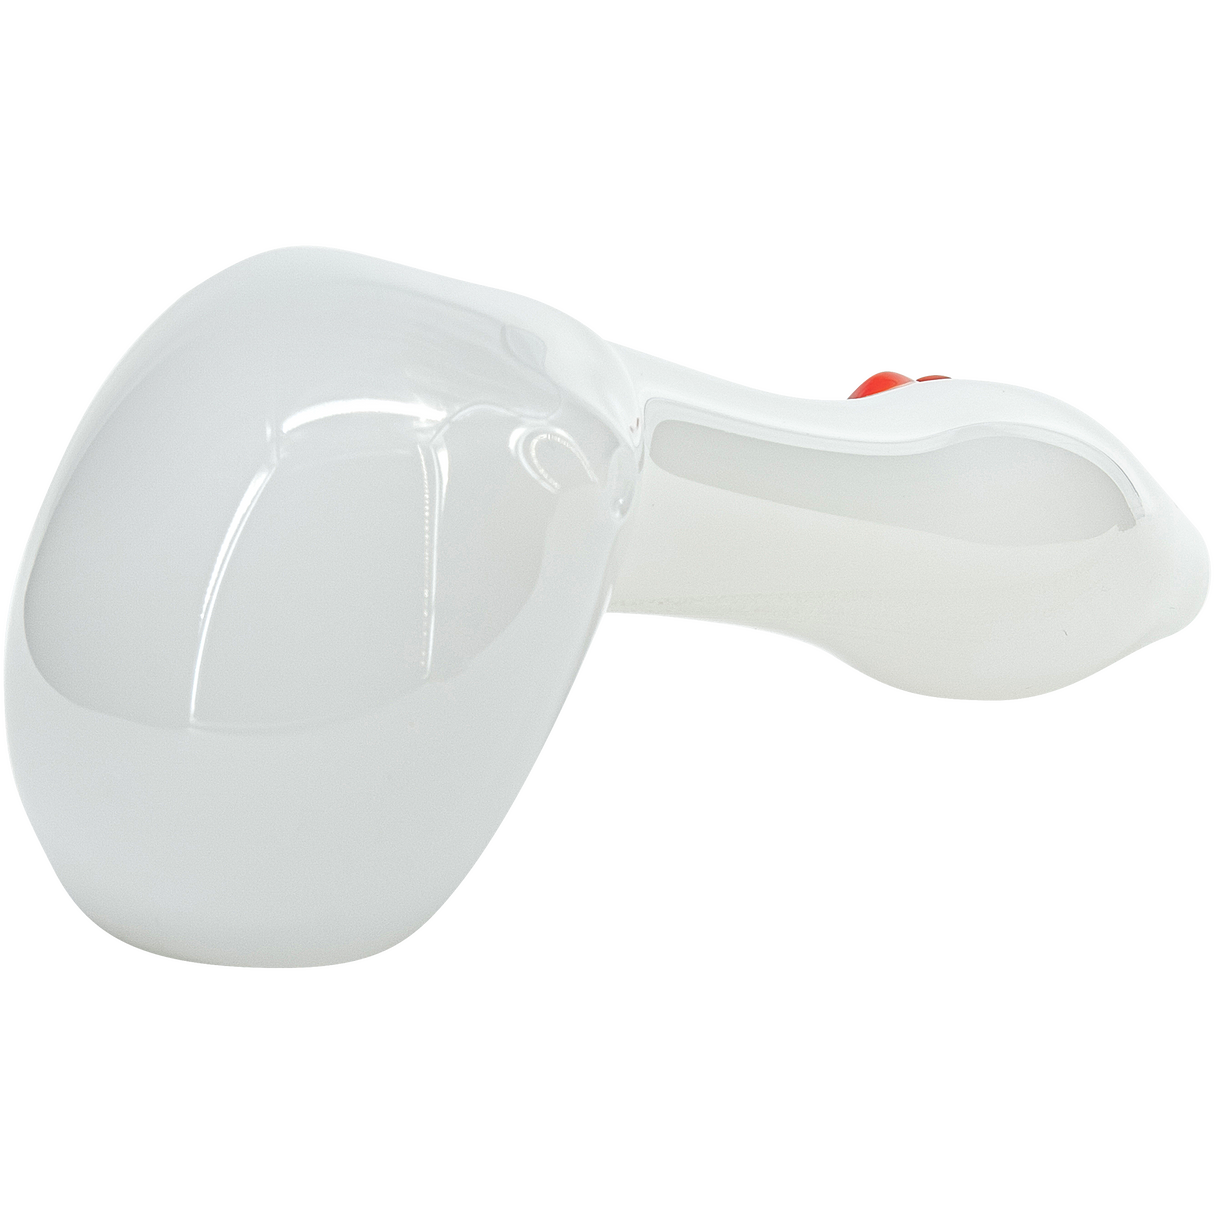 LA Pipes "Drooping Hearts" Solid White Drooper Spoon